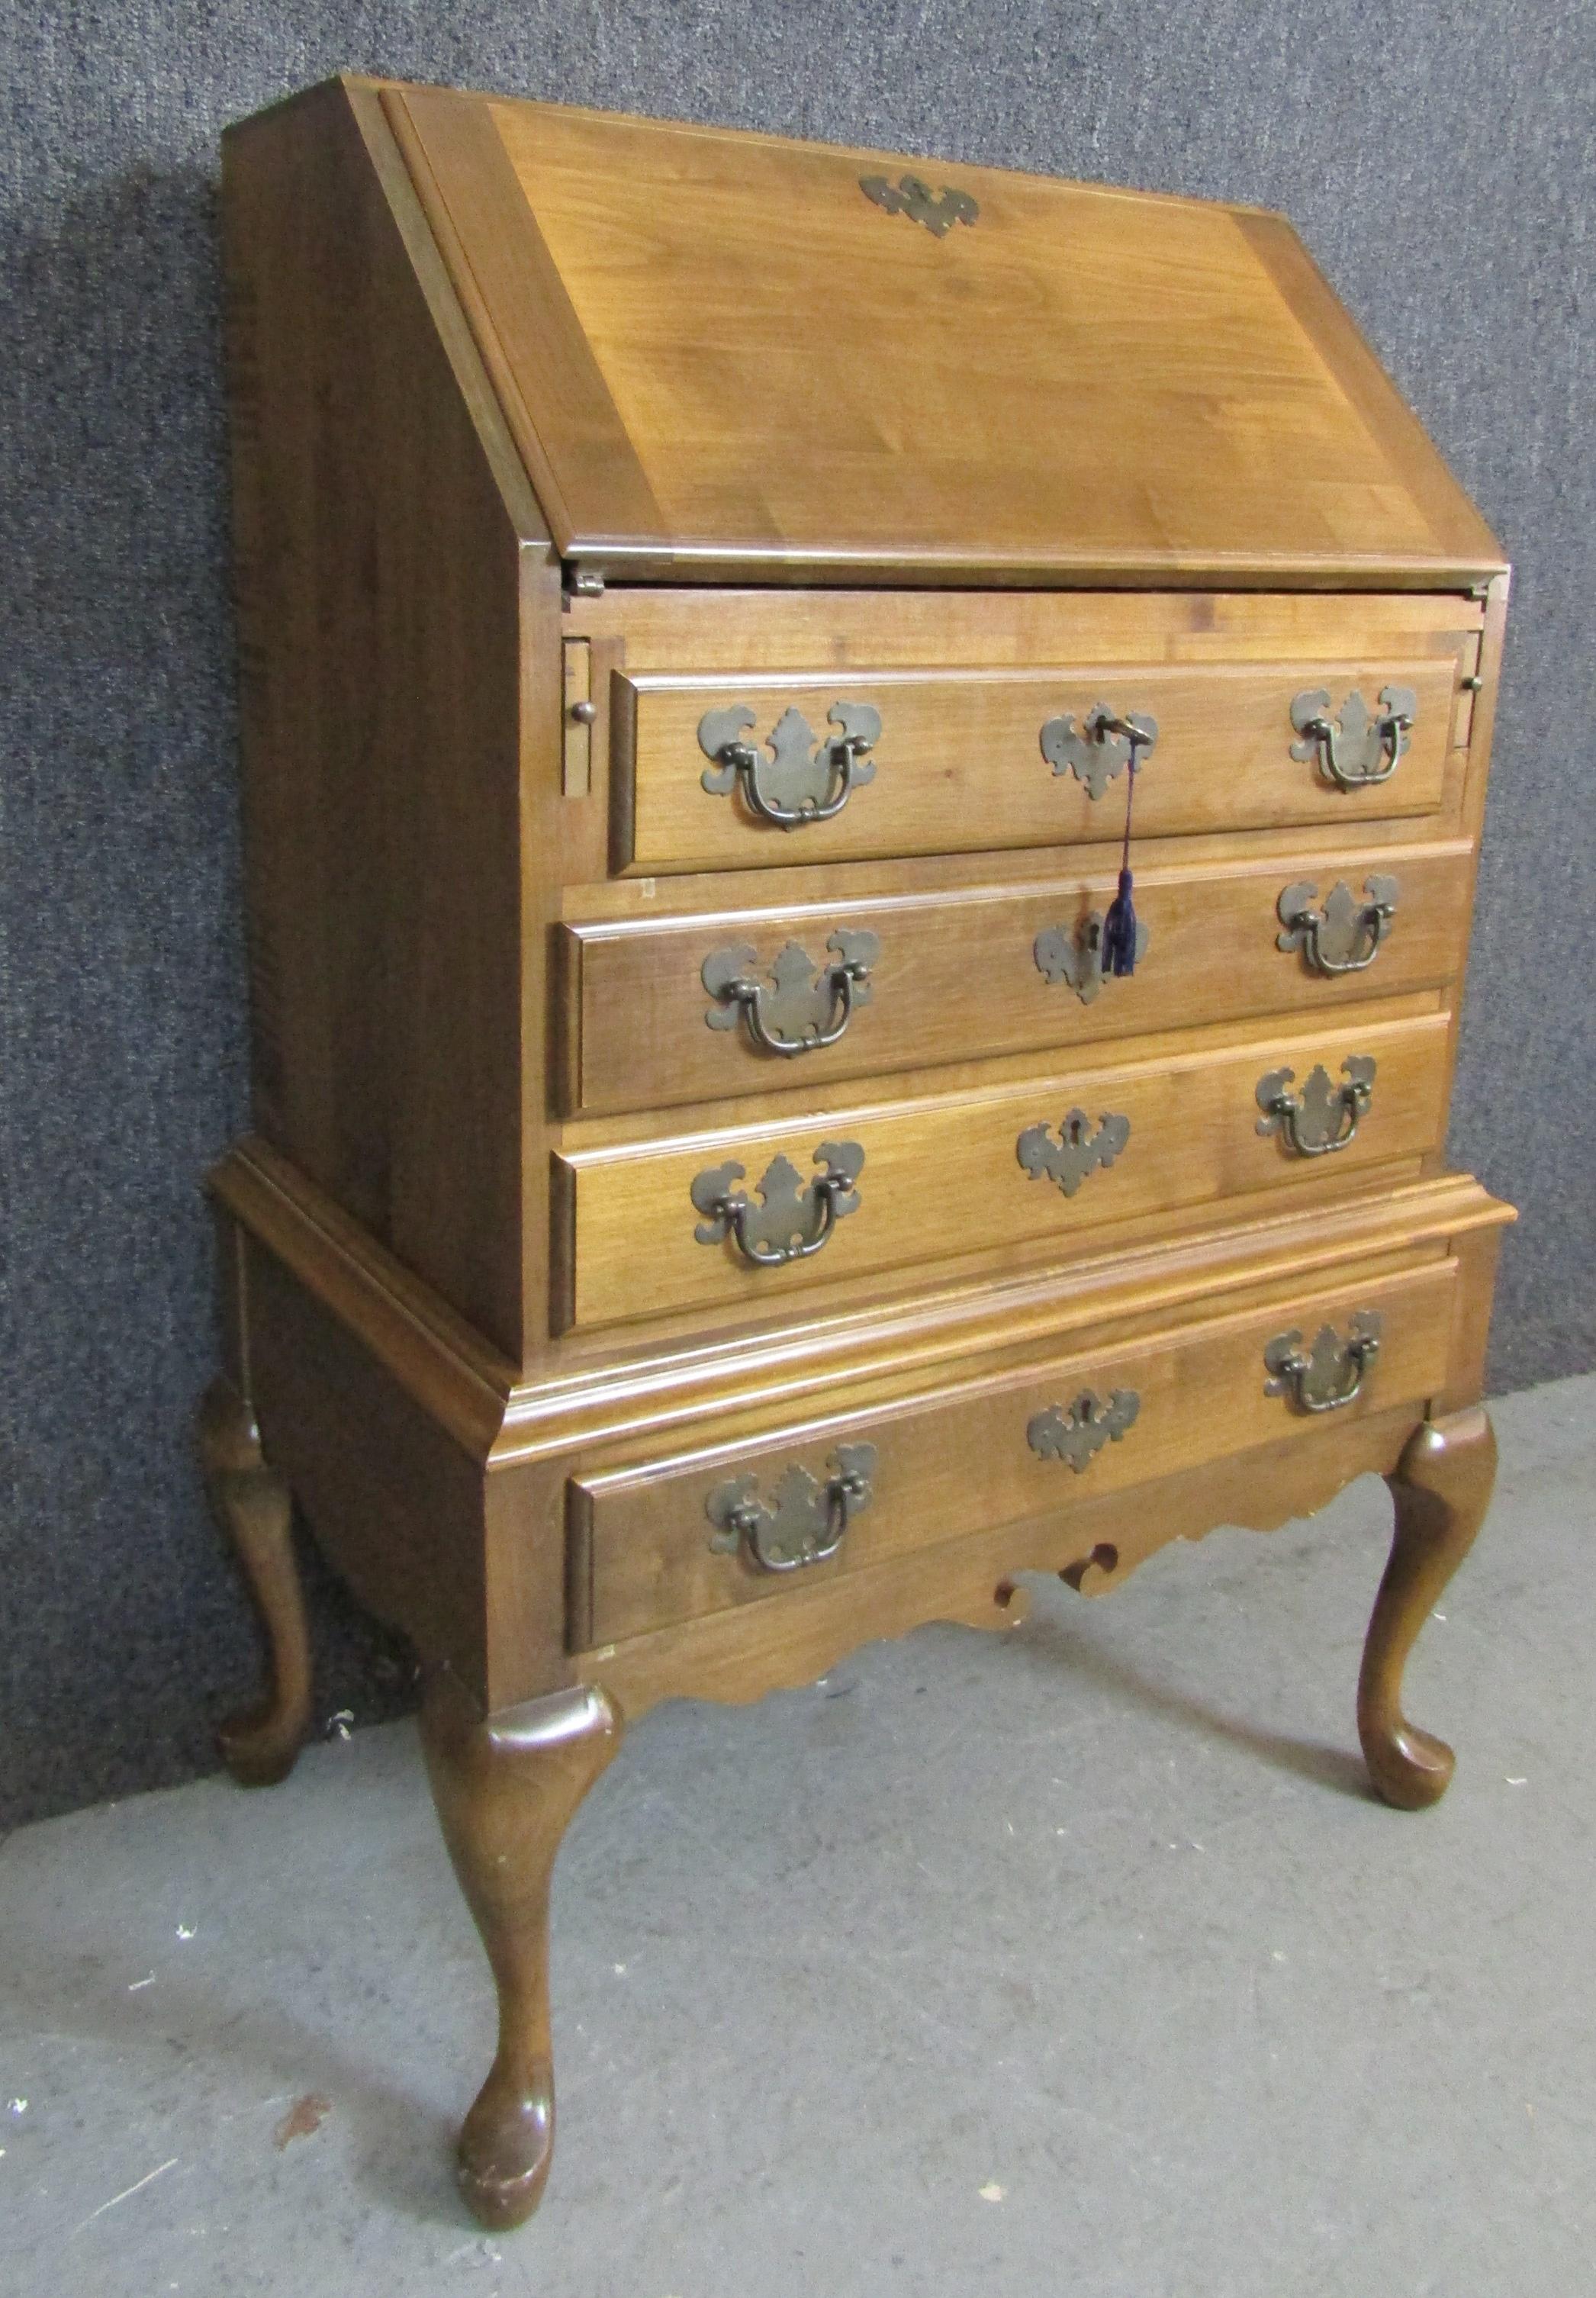 Antique style drop front secretary desk, made in Queen Anne style with brass hardware. Petite size, with 22x17